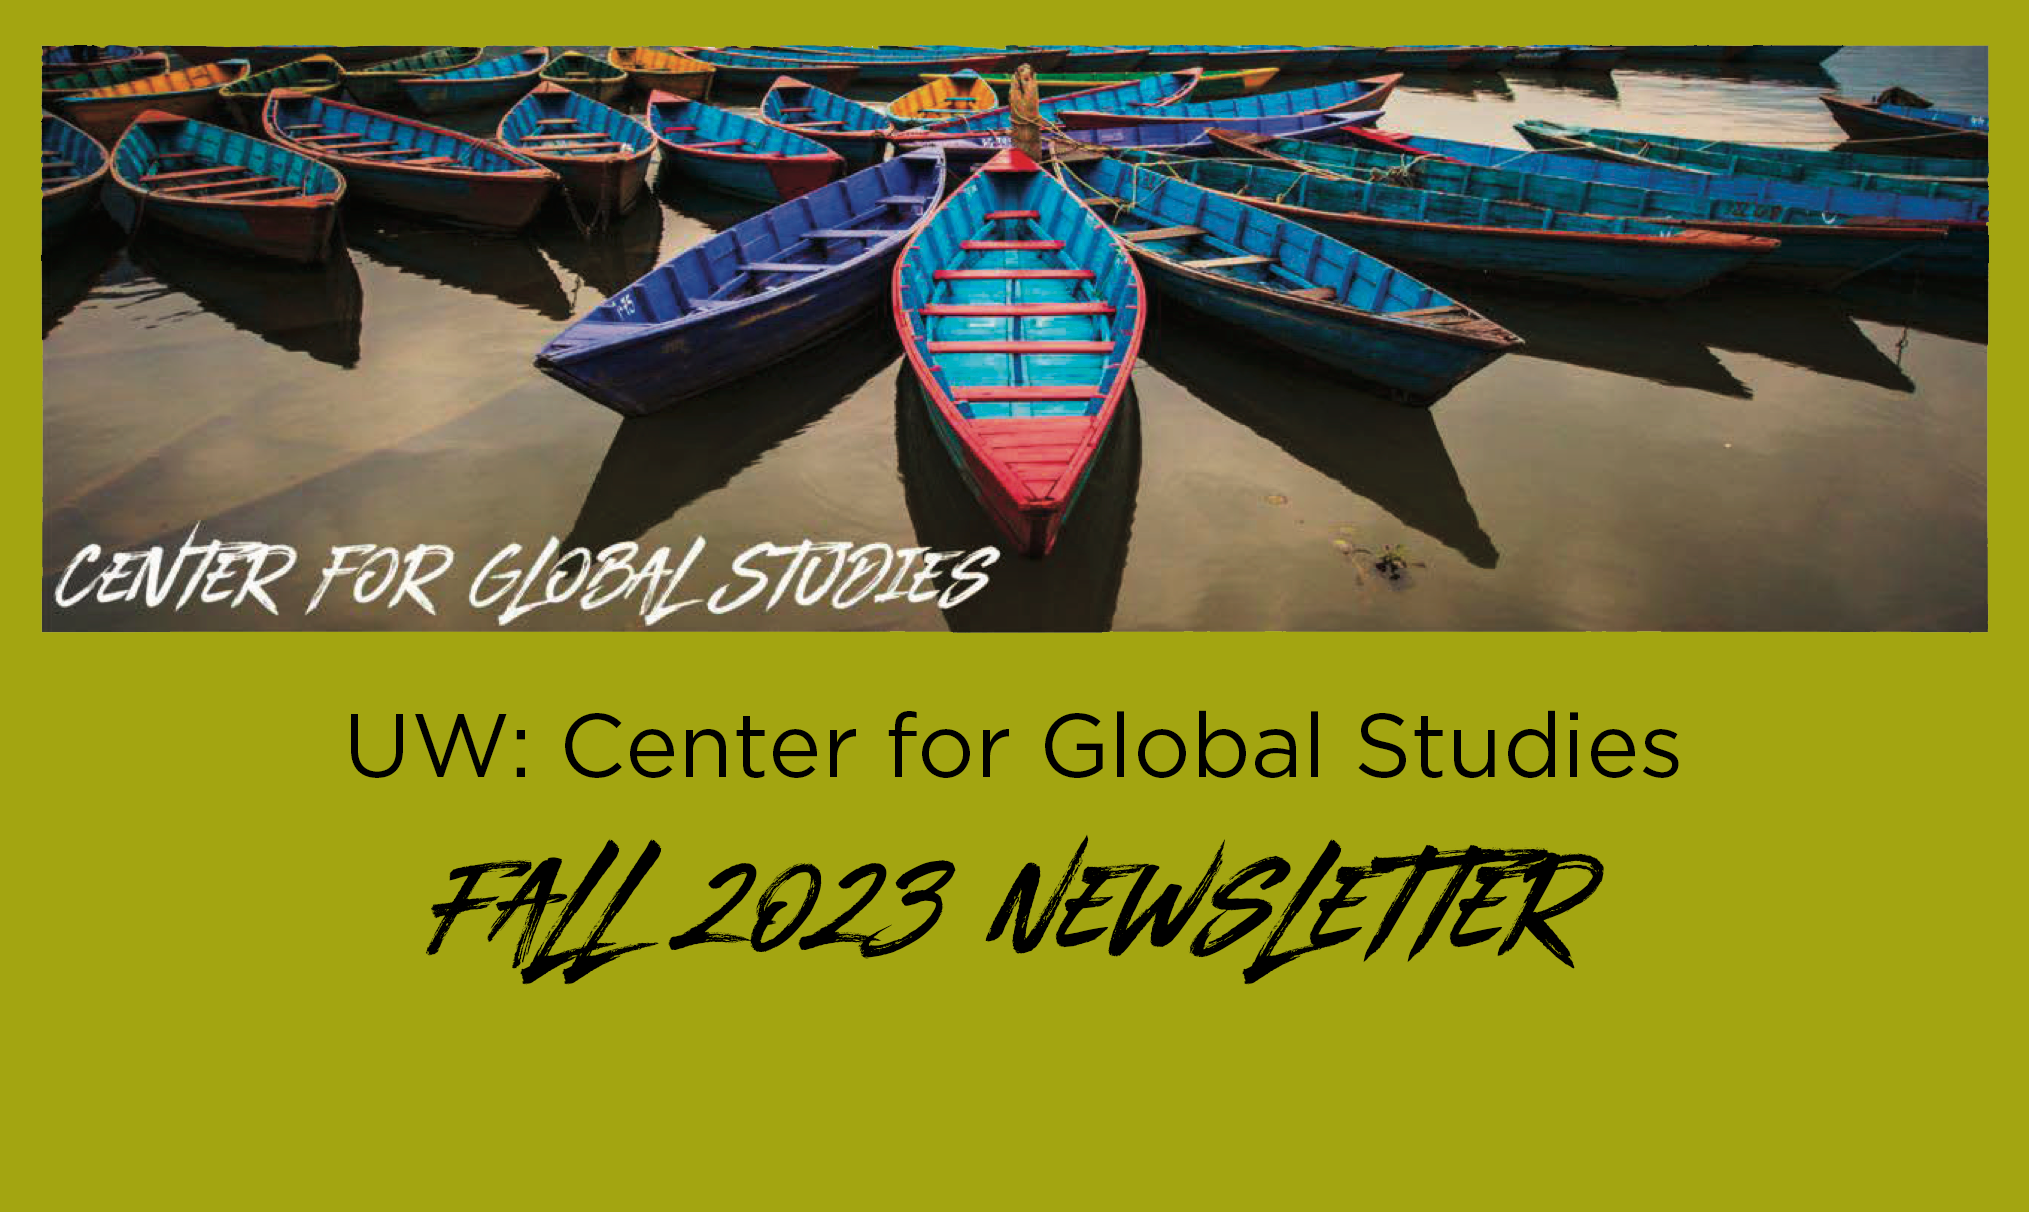 Fall 2023 Newsletter callout, with text for the University of Wyoming and the Center for Global Studies